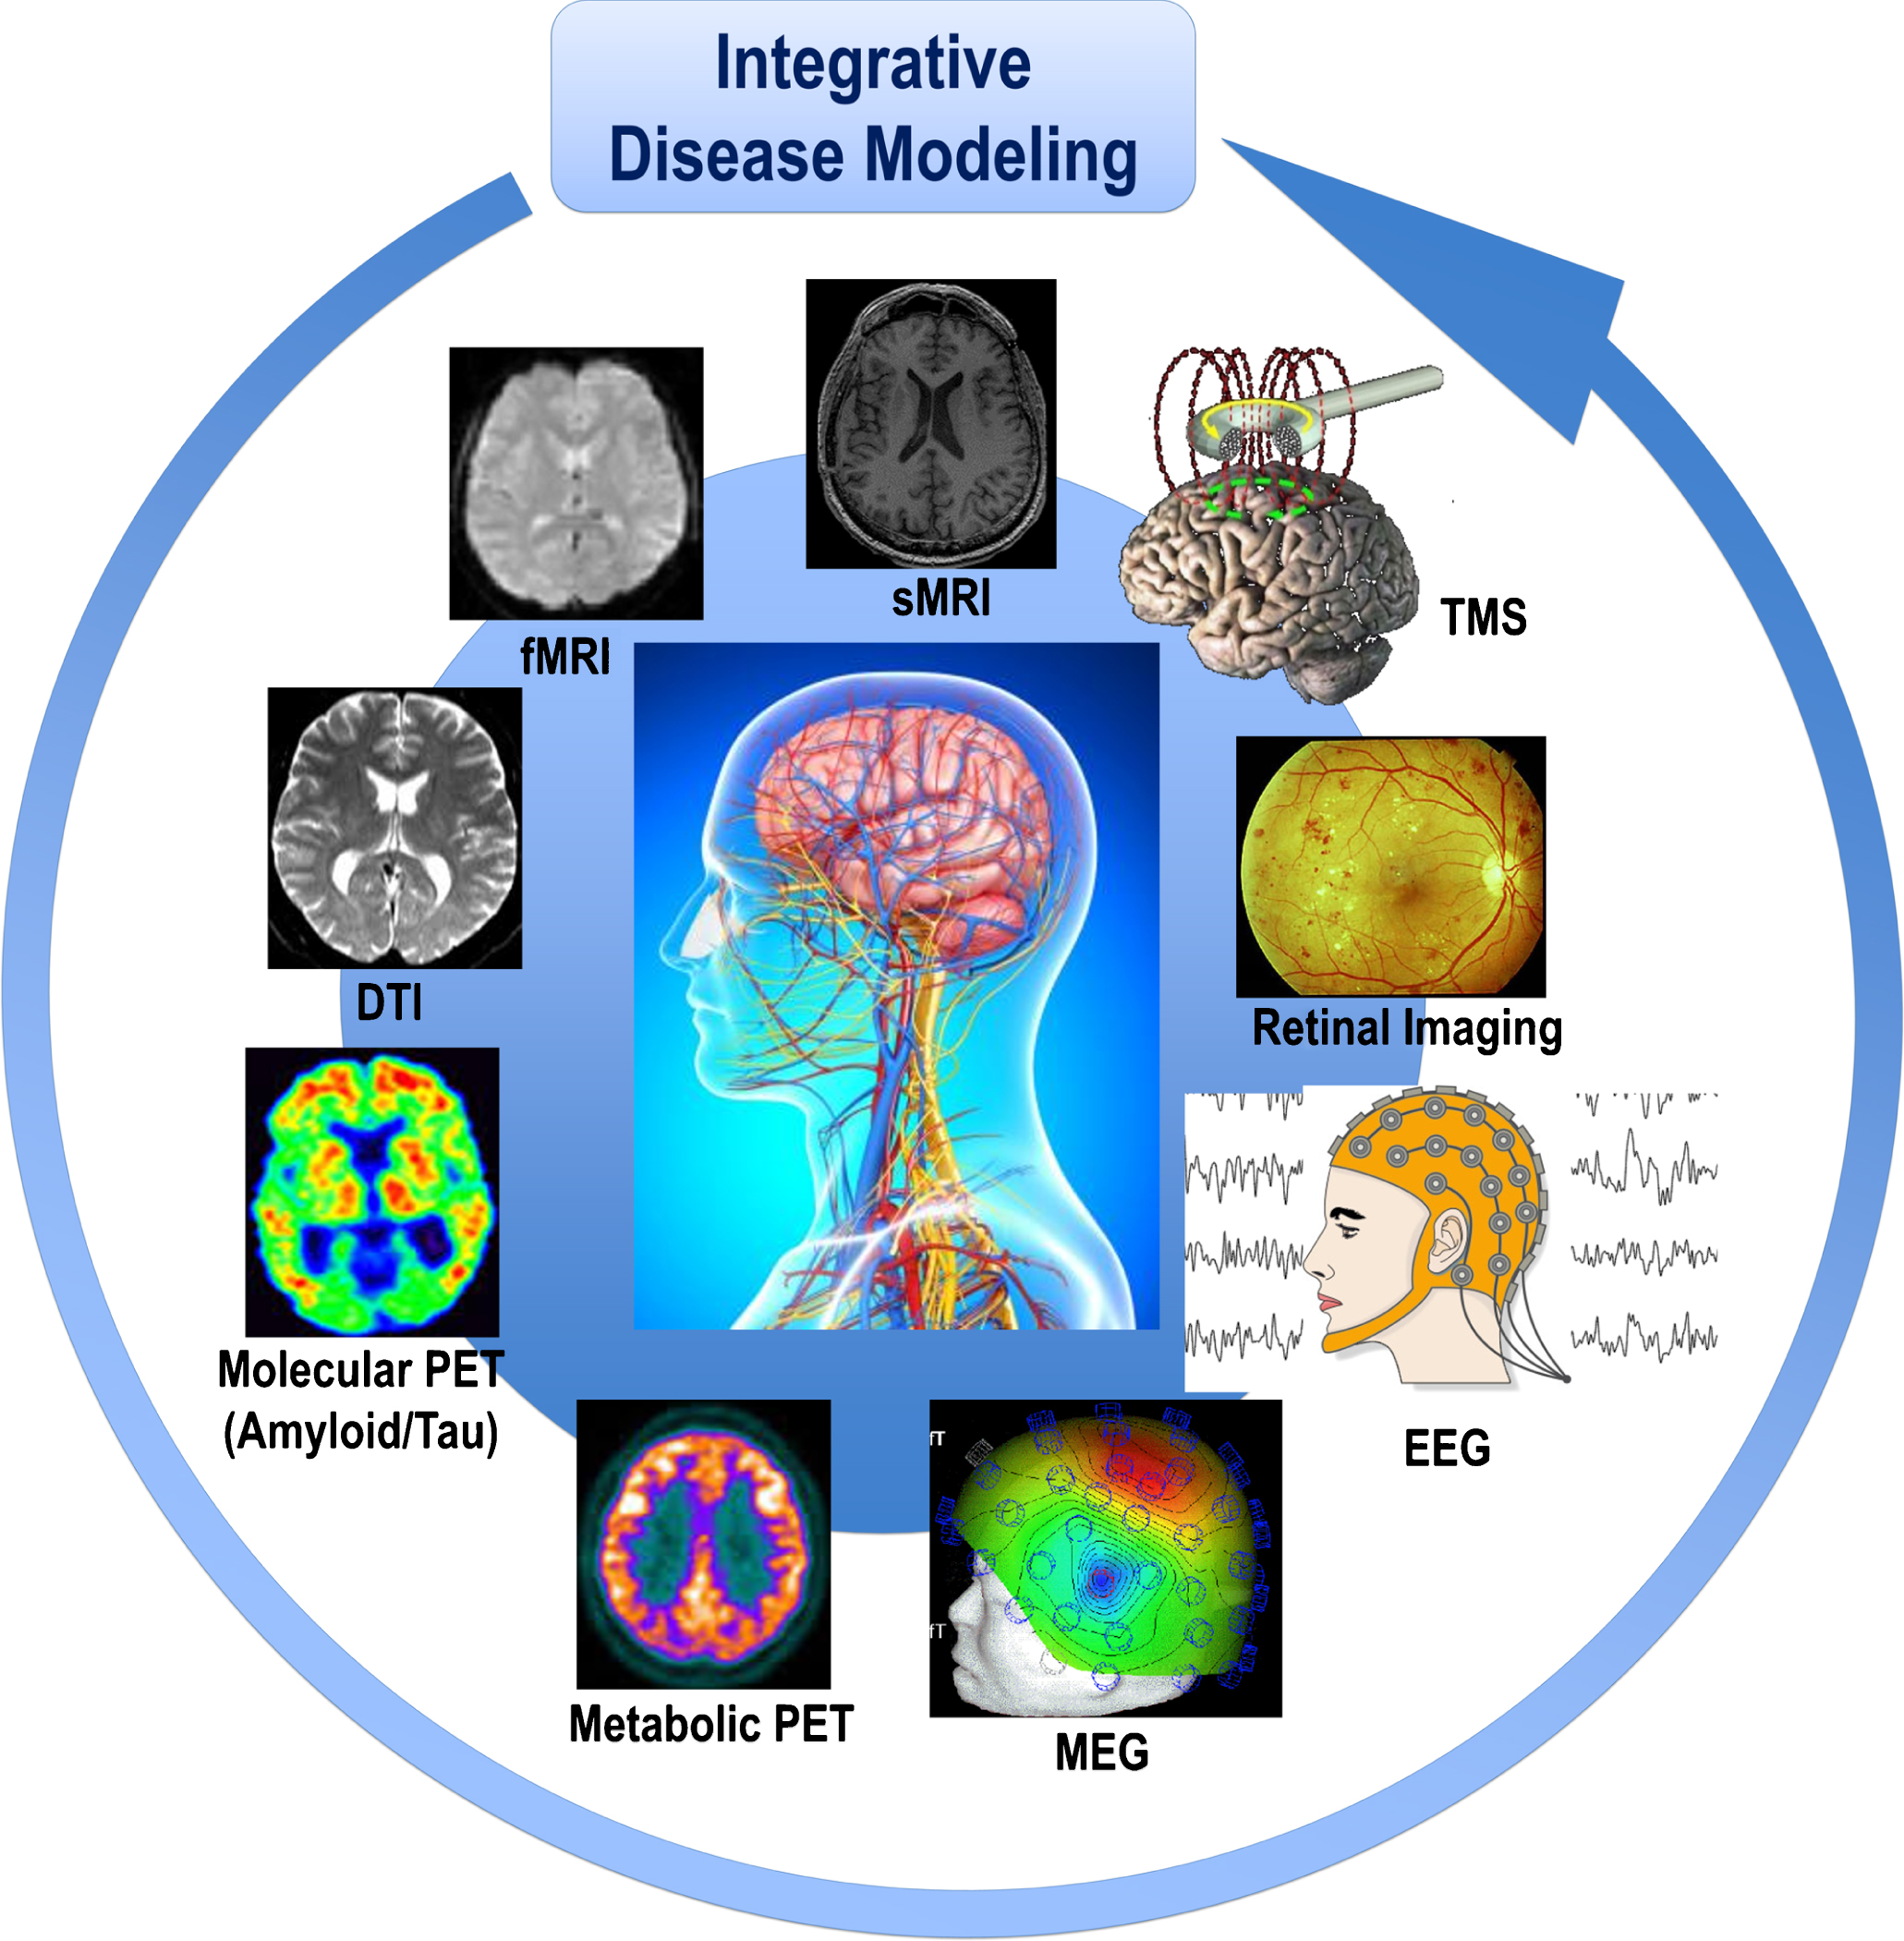 Cohorts stratified according to different neuroimaging modalities and methods are integrated in the disease modeling for classification and prediction of subsets of AD and other ND patients. The paradigm of systems neurophysiology aims at studying the fundamental principles of integrated neural systems functioning by integrating and analyzing neural information recorded in multimodal fashion through computational modeling and combining data-mining methods. This paradigm may be used to decode the information contained in experimentally-recorded neural activity using analysis methods that are able to integrate the recordings of simultaneous, single-modality brain cell activity such as fMRI or EEG to generate synergistic insight and possibly infer hidden neurophysiological variables. The ultimate goal of systems neurophysiology is to clarify how signals are represented within neocortical networks and the specific roles played by the multitude of different neuronal components. AD, Alzheimer’s disease; DTI, diffusion tensor imaging; EEG, electroencephalography; MEG, magnetoencephalography; fMRI, functional magnetic resonance imaging, sMRI, structural magnetic resonance imaging; ND, neurodegenerative diseases; PET, positron emission tomography; TMS, transcranial magnetic stimulation